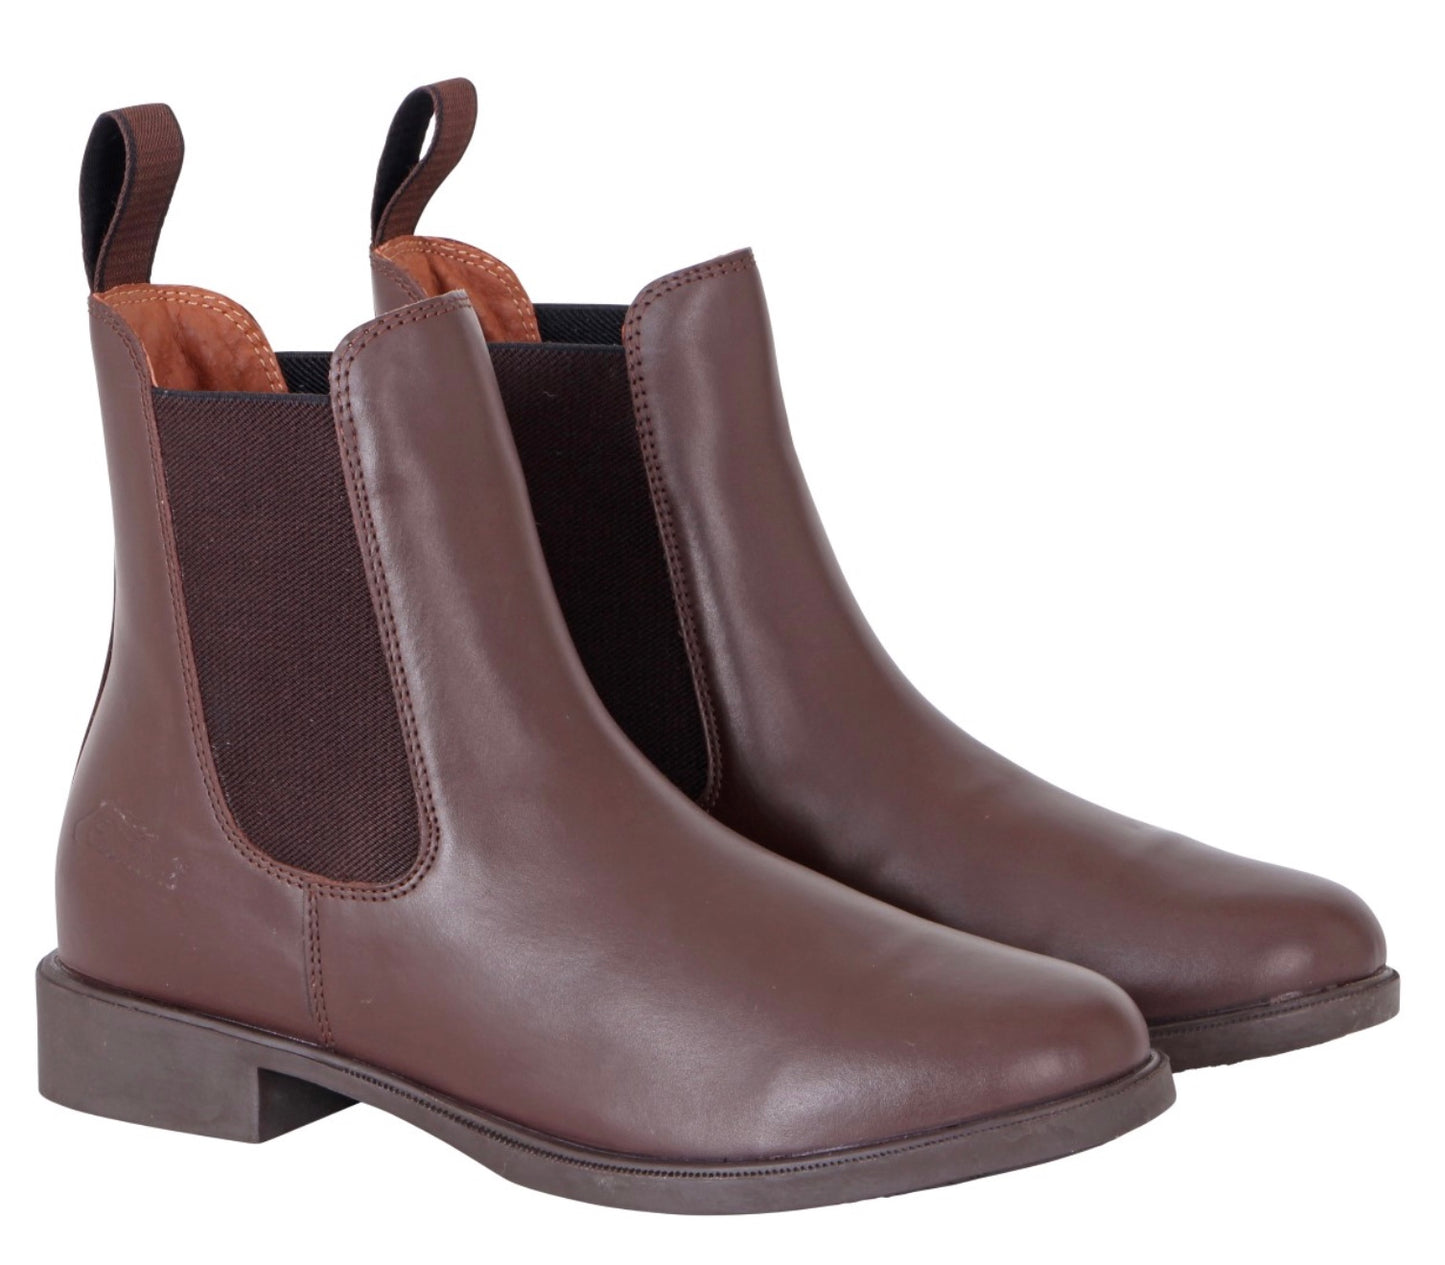 CAVALLINO Leather Competitor Boots